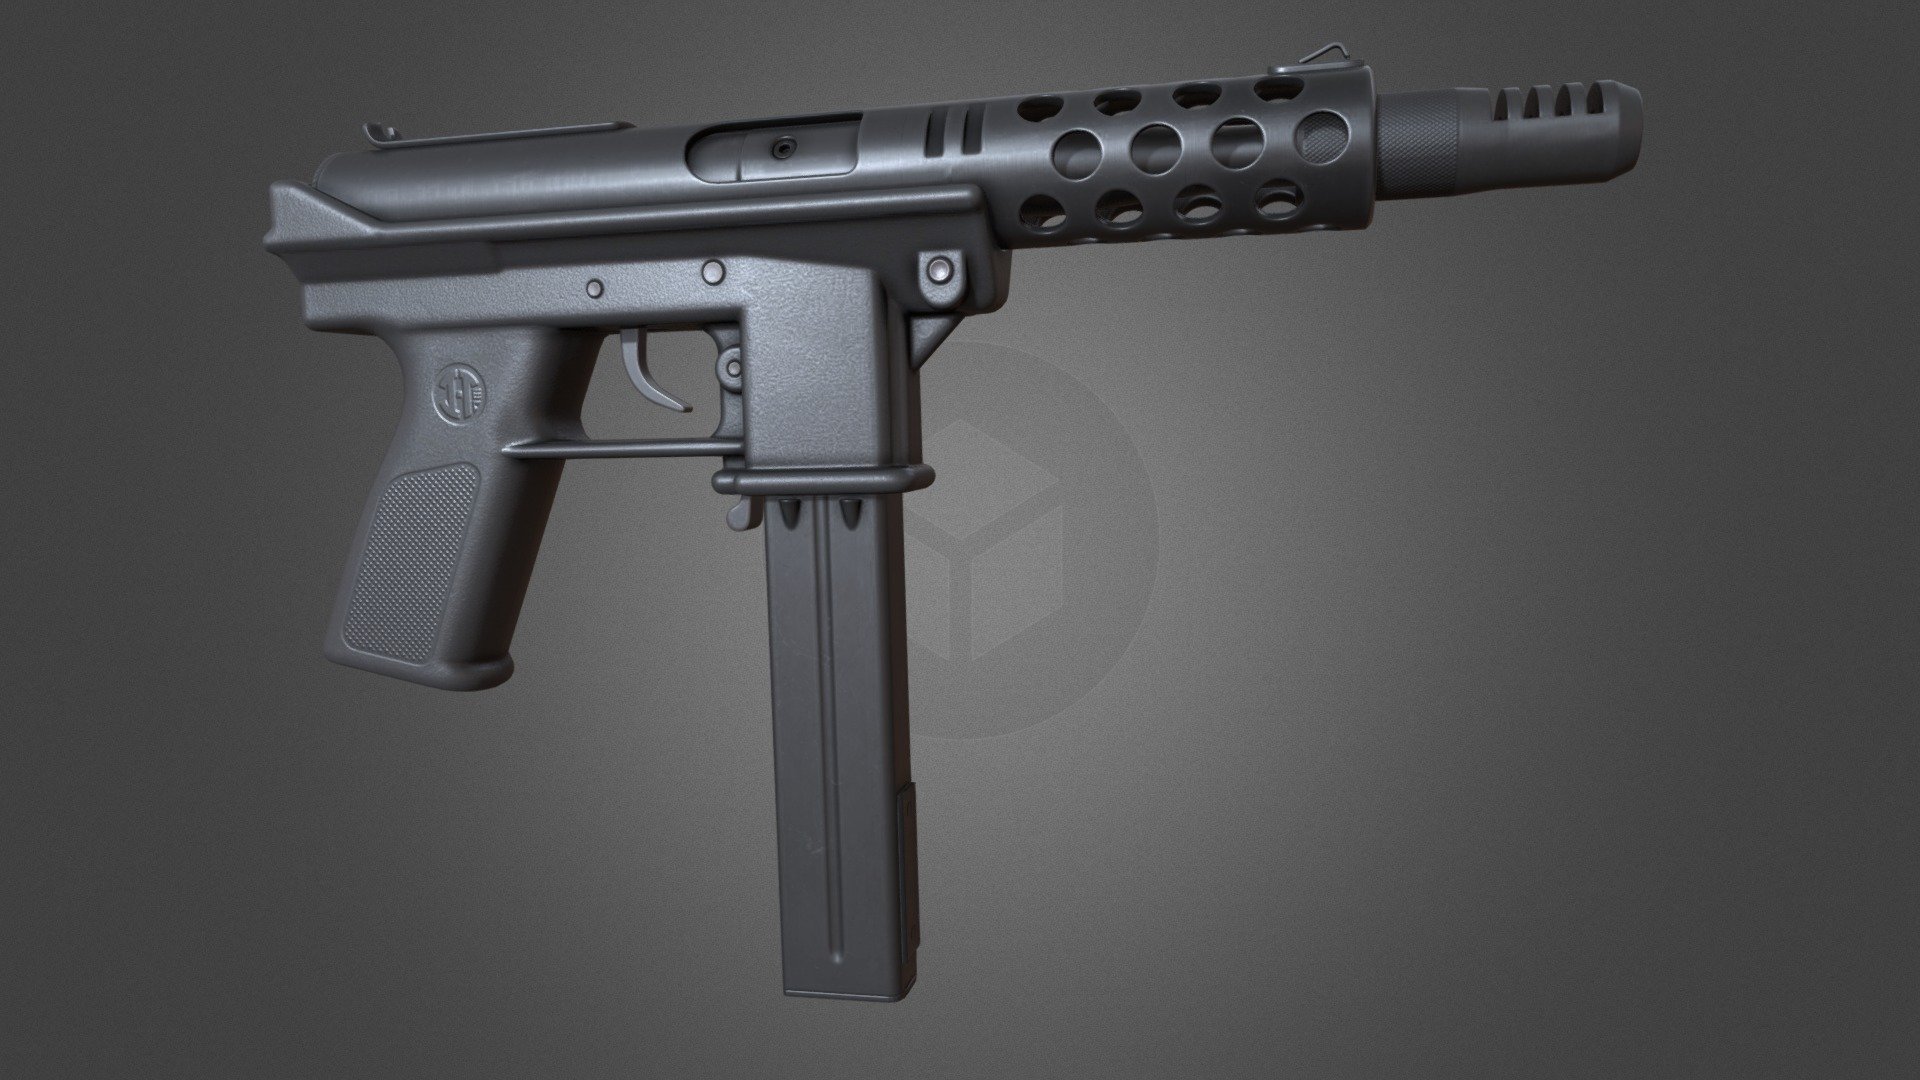 TEC-9 is an optimized model with excellent texturing for best outcome.

The model has an optimized low poly mesh with the greatest possible number of simplifications that do not affect photo-realism but can help to simplify it, thus lightening your scene and allowing for using this model in real-time 3d applications.

In this product, all objects are ERROR-FREE. All LEGAL Geometry. Subdivisions are not required for this product. Real-world accurate model.


Format Type



3ds Max 2017 (Default Physical PBR Shader)

FBX

OBJ

3DS


Texture Type
2 multi/sub material used. 2 different sets of:




Albedo

Metalness

Roughness

Normal

AO

You might need to re-assign textures map to model in your relevant software

You might need to flip green channel of Normal map according to your relevant softwar - TEC-9 Semi-Automatic Pistol - Buy Royalty Free 3D model by 3d Assets Gun (@3dassetsgun) 3d model